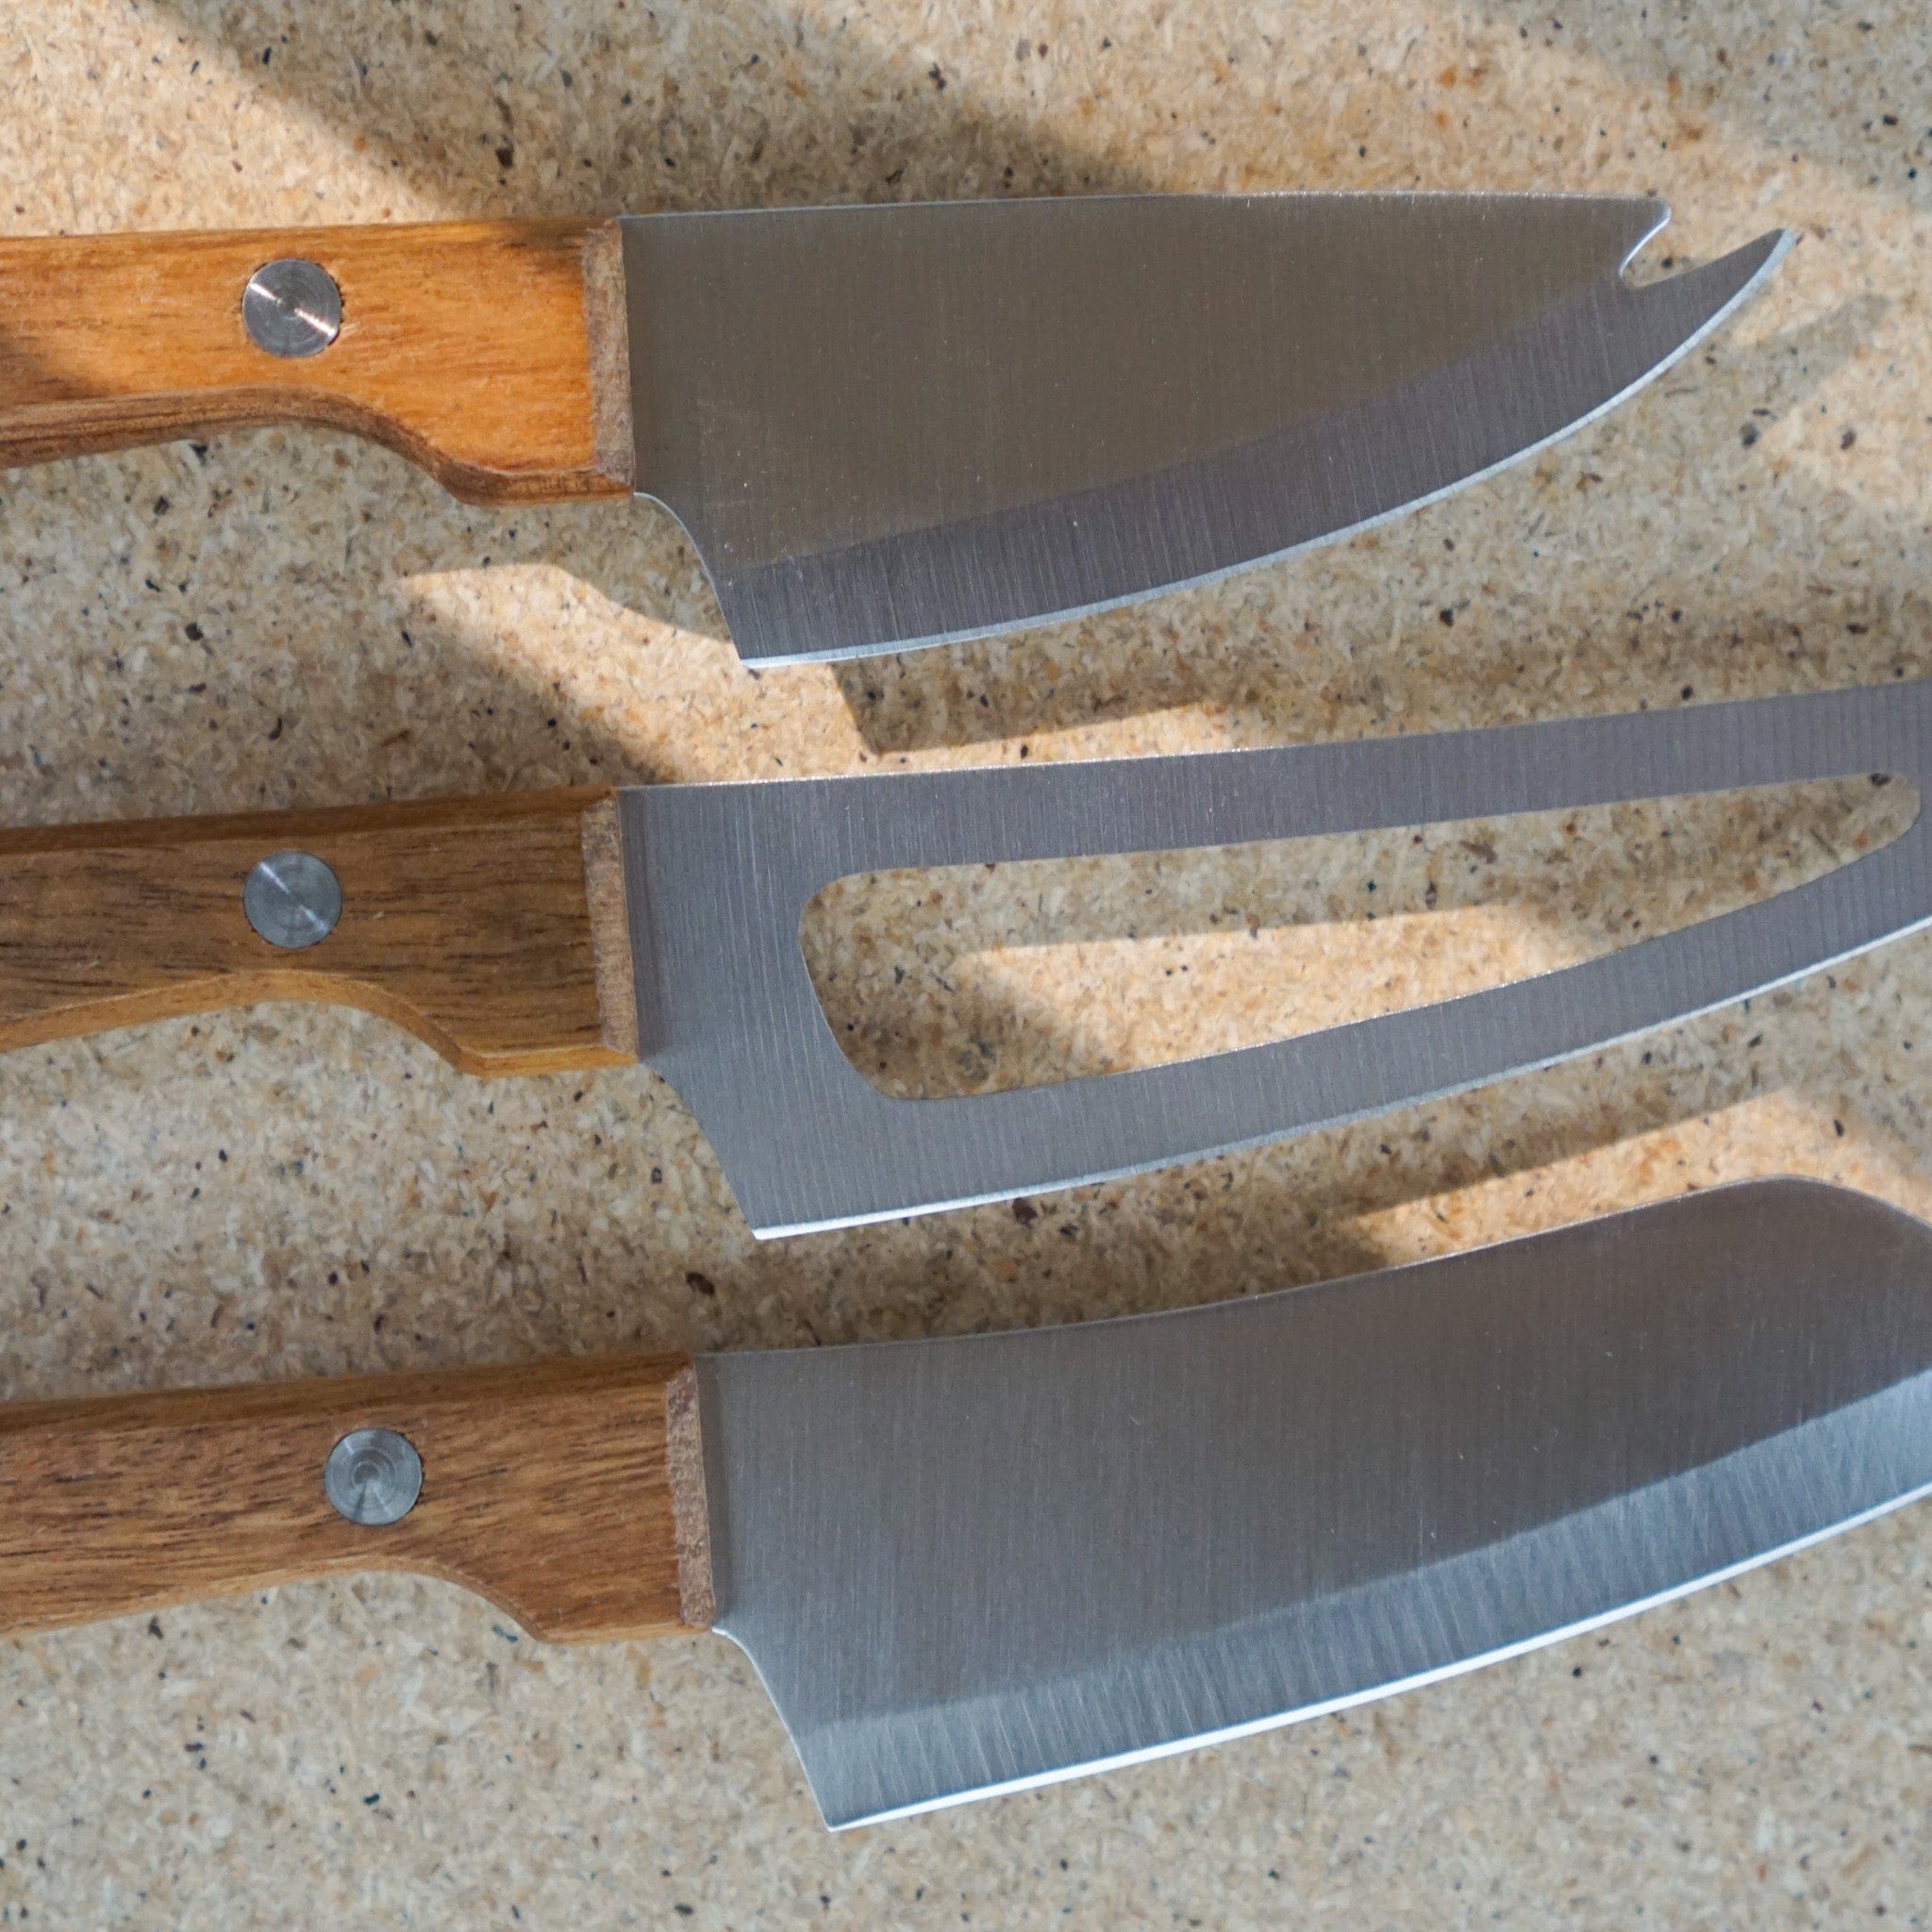 Society of Lifestyle Kitchen Acacia Wood and Stainless Steel Knifes - Sold Individually